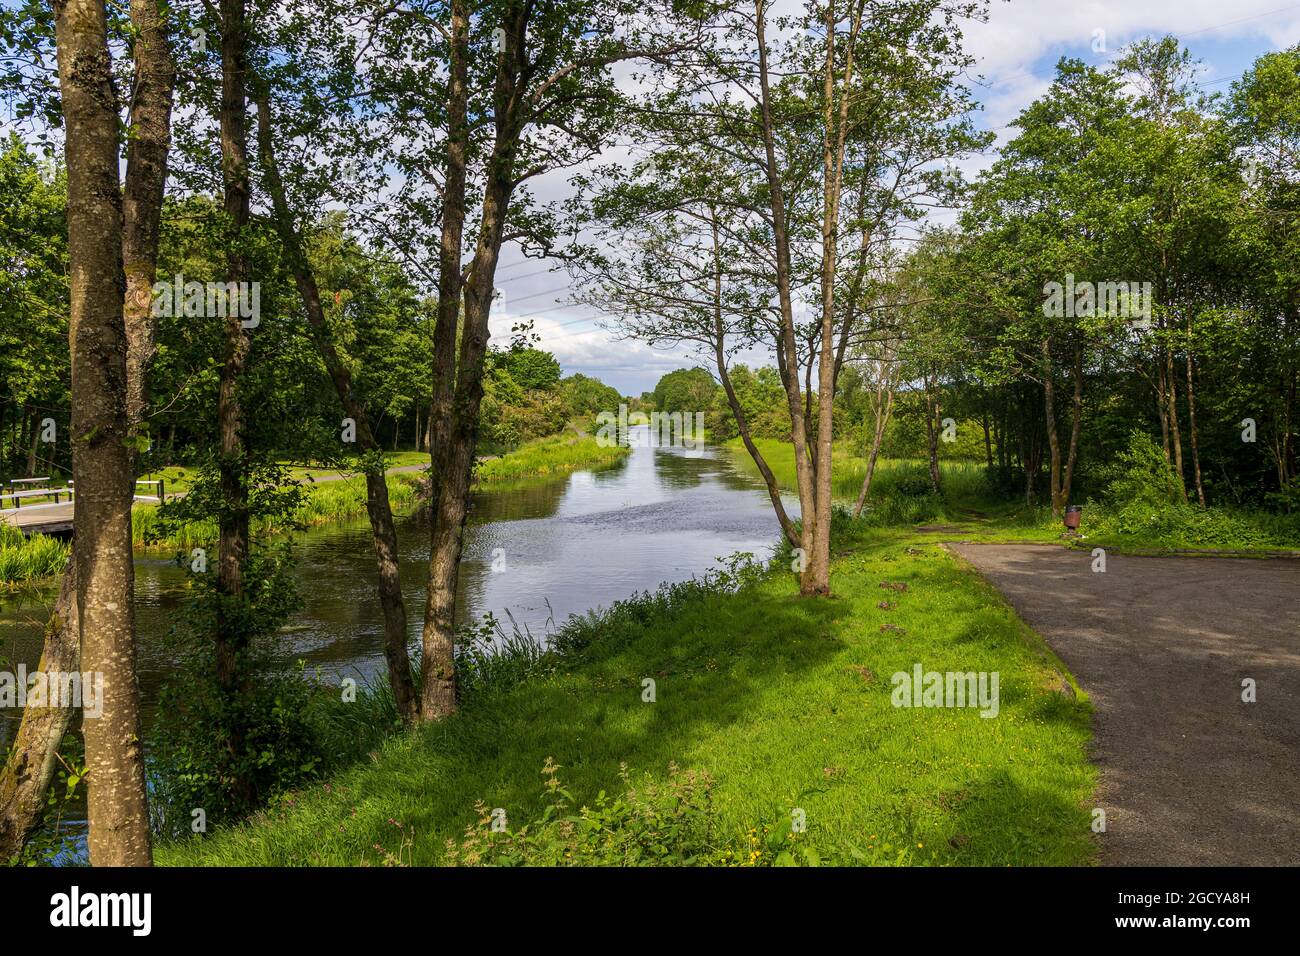 Forth and Clyde Canal near Auchinstarry.  The Forth and Clyde Canal is a canal opened in 1790, crossing central Scotland;. Stock Photo